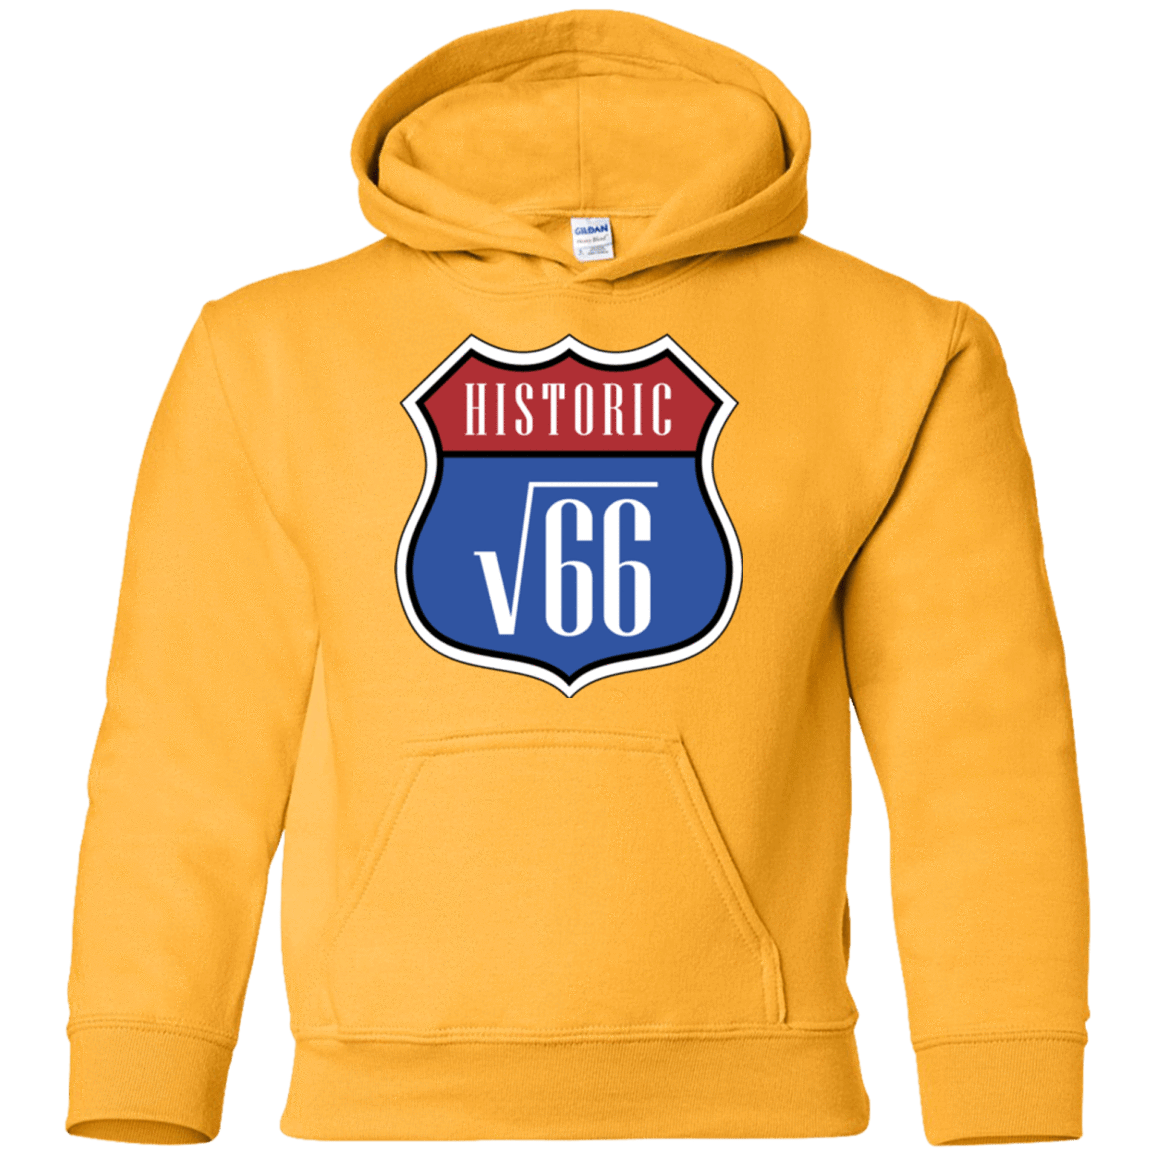 Sweatshirts Gold / YS Route v66 Youth Hoodie